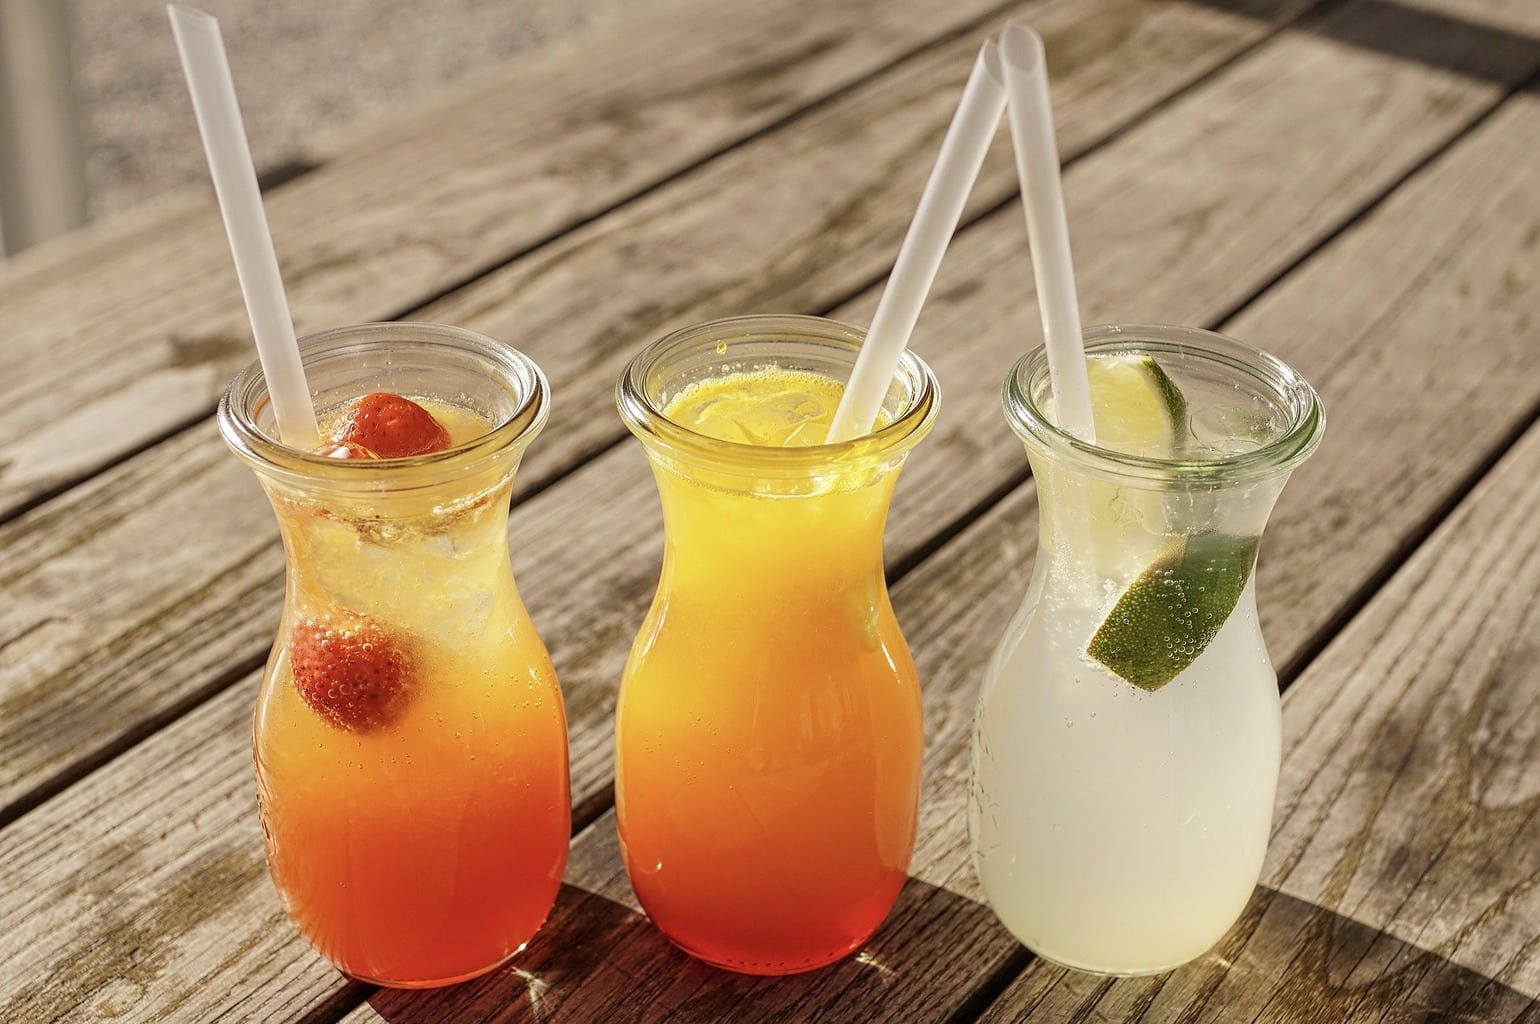 Aguas frescas - water is usually drunk flavored in Mexico